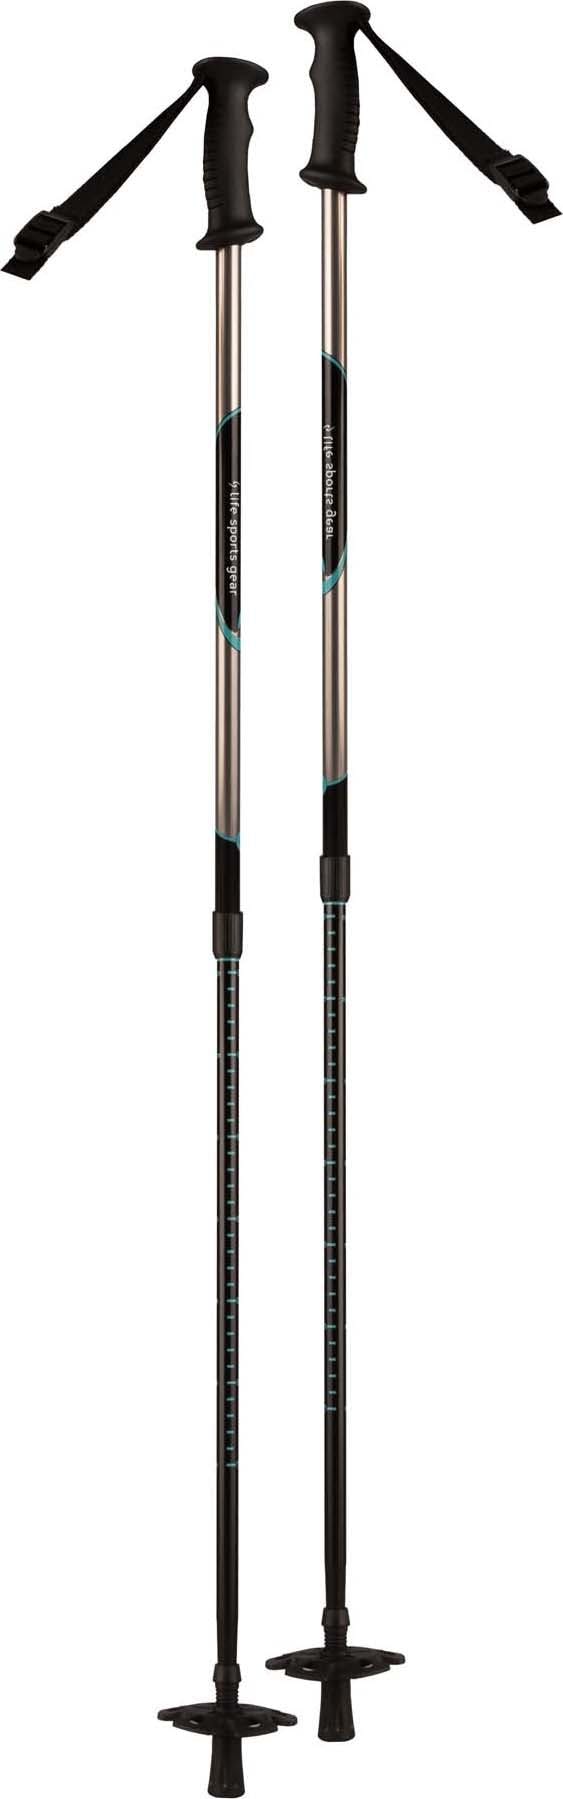 Product image for Micro Trail Trekking Poles - Kids